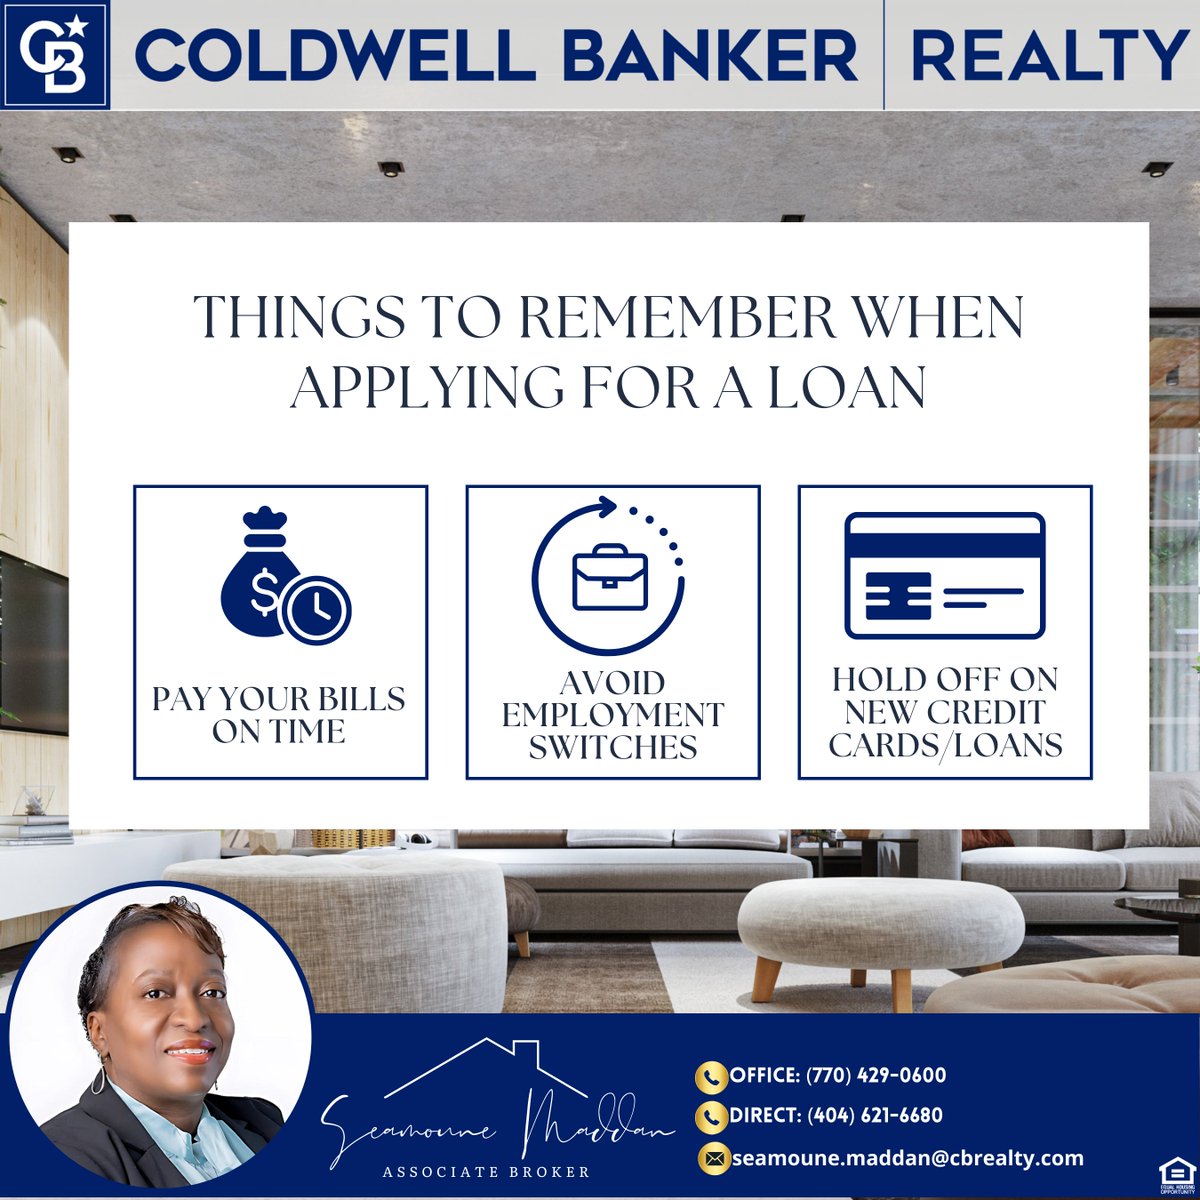 🏠💭 Ready for your dream home? Here are key tips if you're considering a home loan soon. 📝🏡 Need expert guidance? Reach out to me – I'll navigate the journey with you! 🌟💼 #HomeLoanTips #RealEstateGuidance #YourDreamHomeAwaits